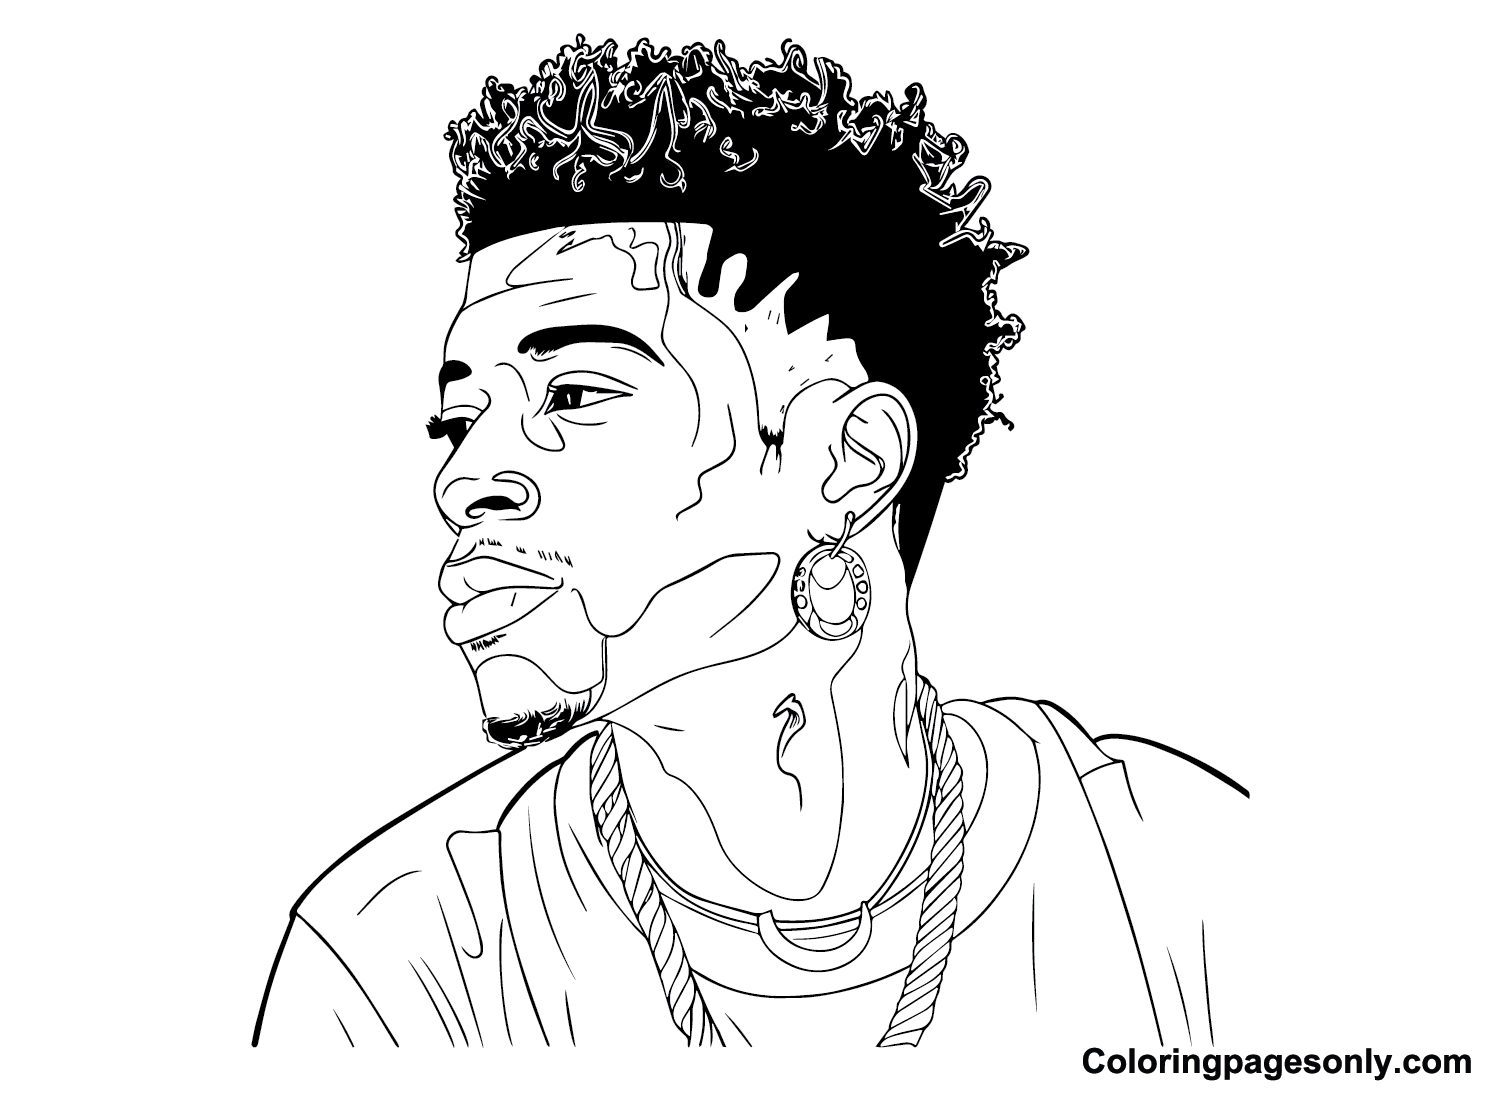 Blueface Free Coloring Pages